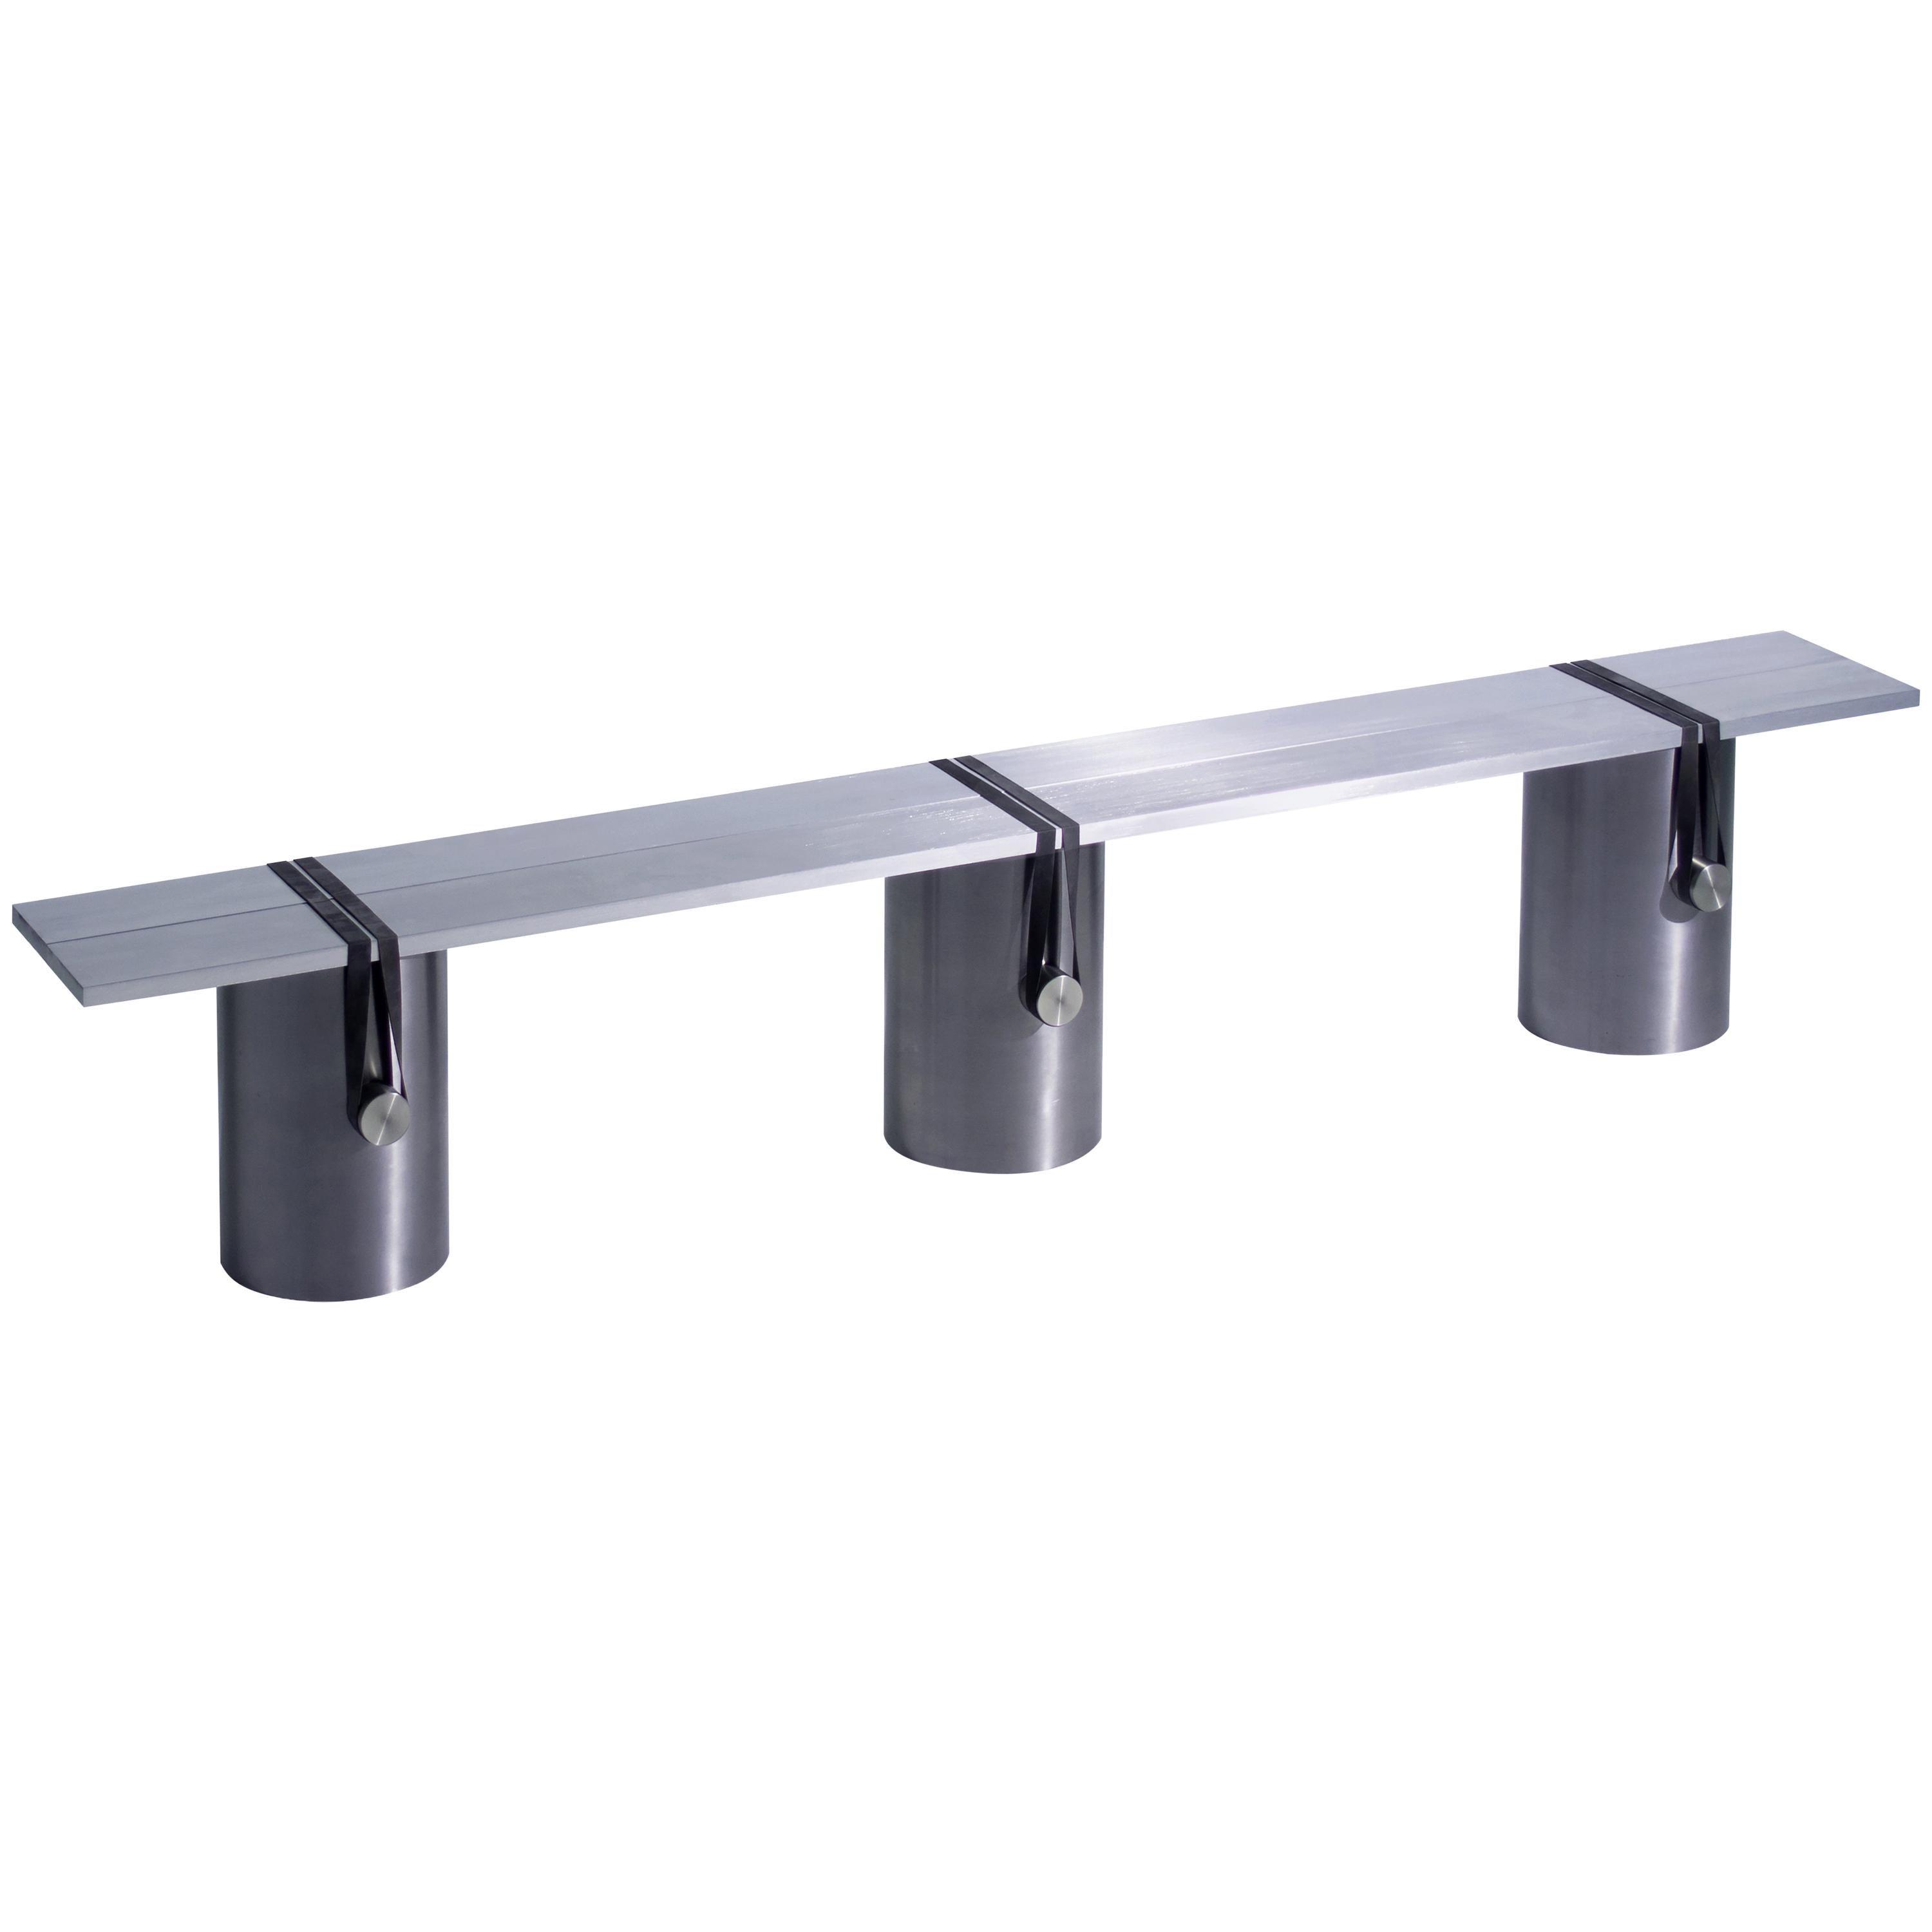 Contemporary RB02 Bench in Steel, Stainless Steel and Aluminium For Sale